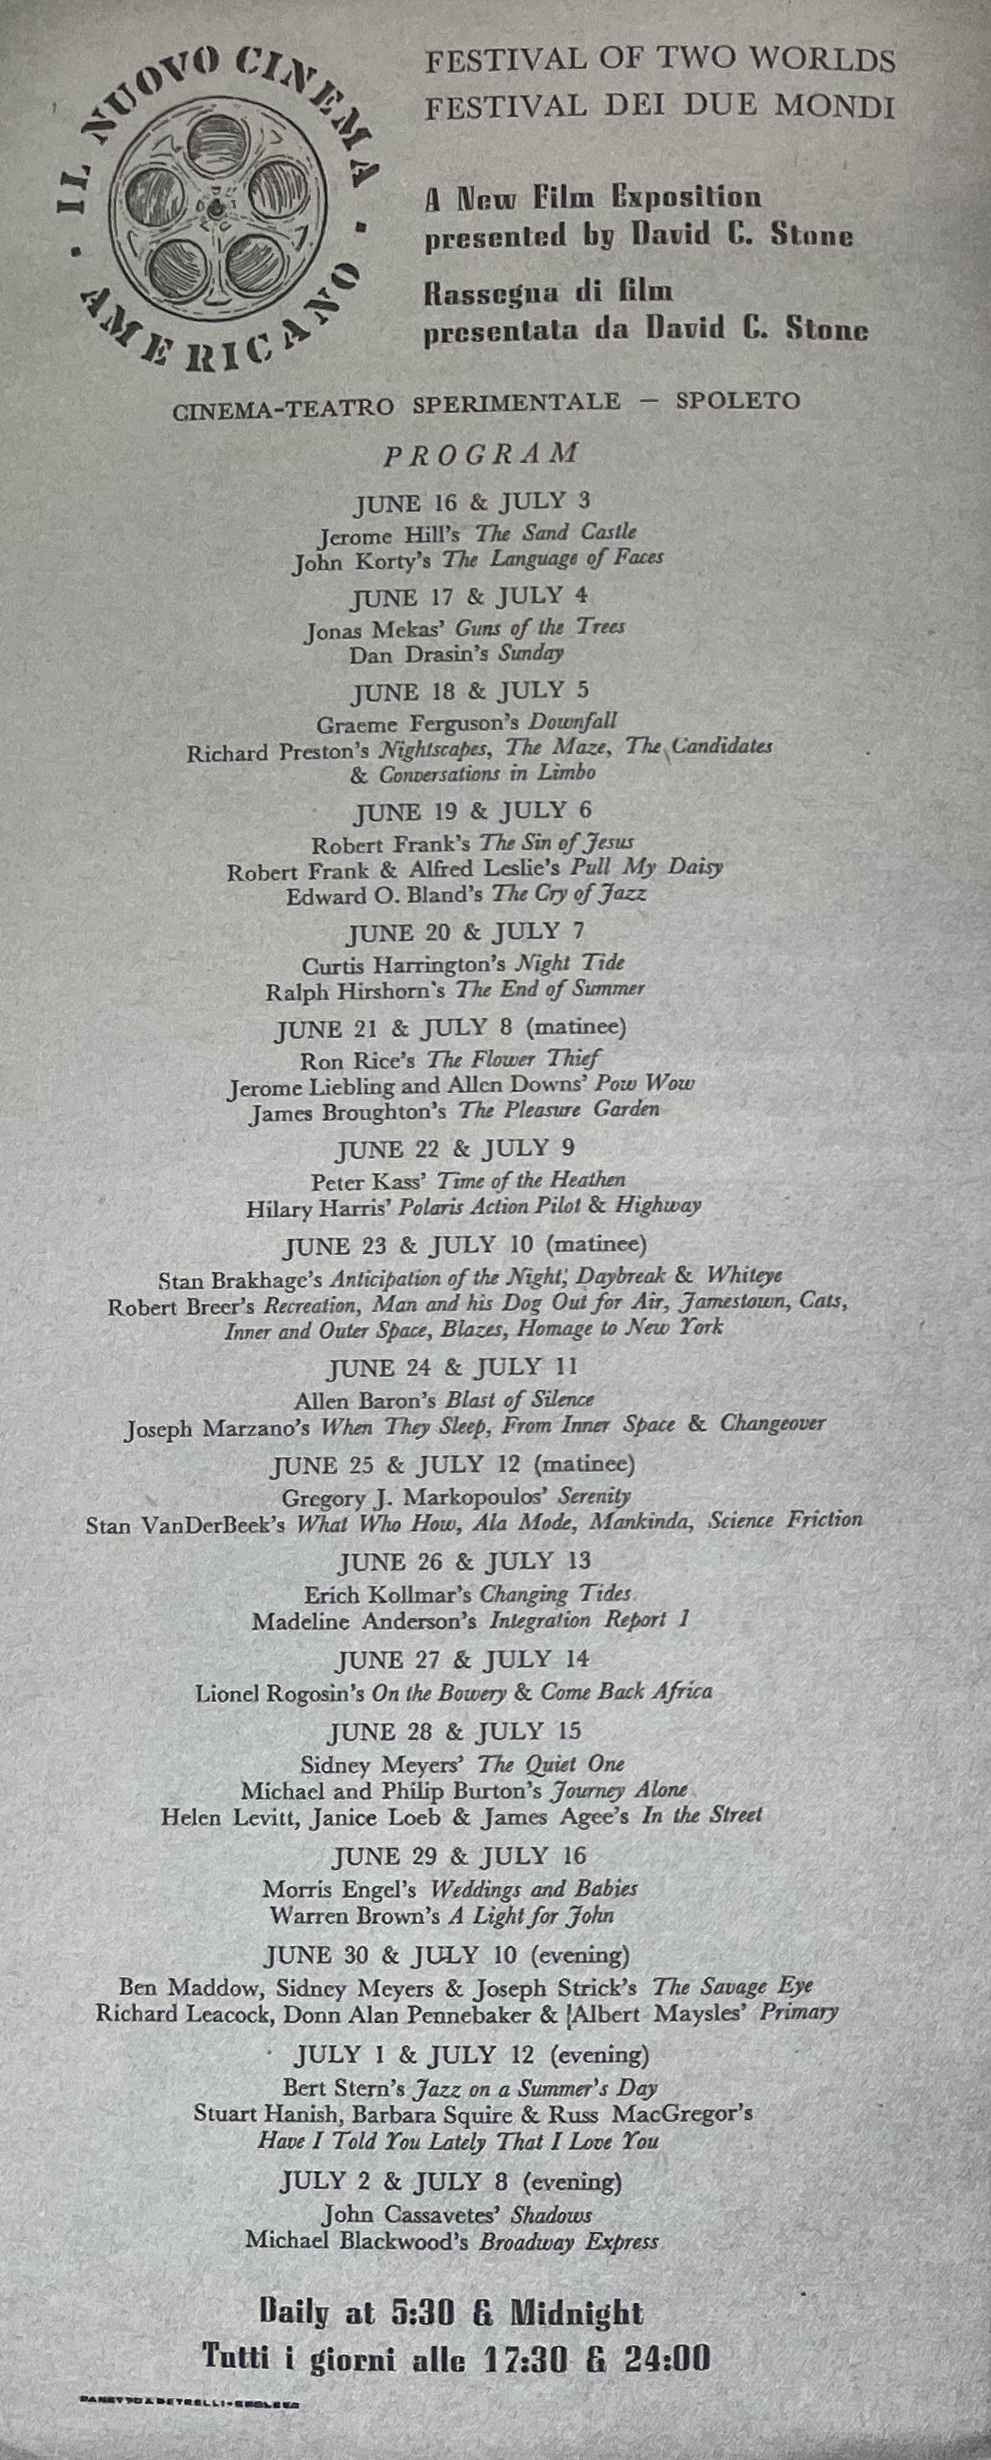 Lineup for the 1960 Spoleto Festival showing films from the New American Cinema